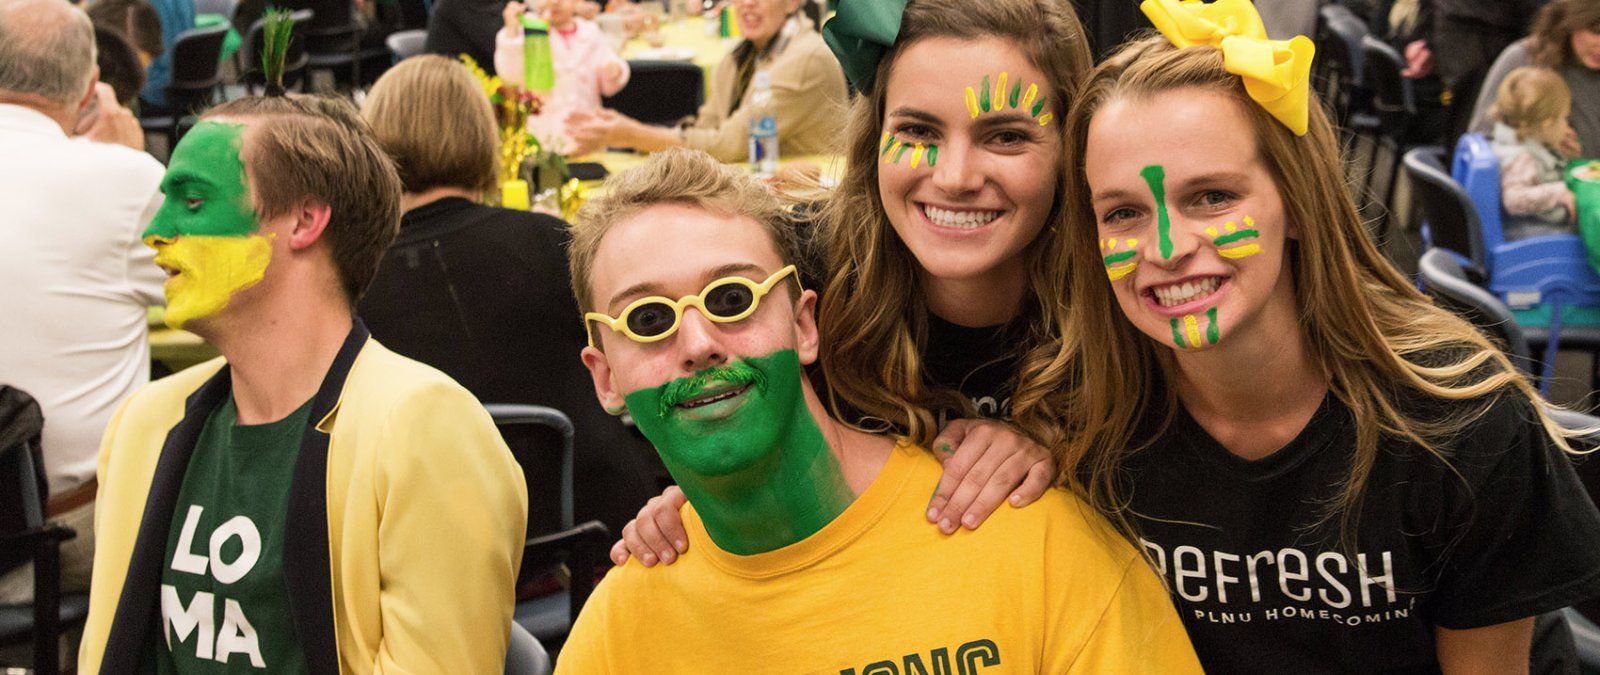 Students decked out in green and gold clothing have their faces colorfully painted for Homecoming.